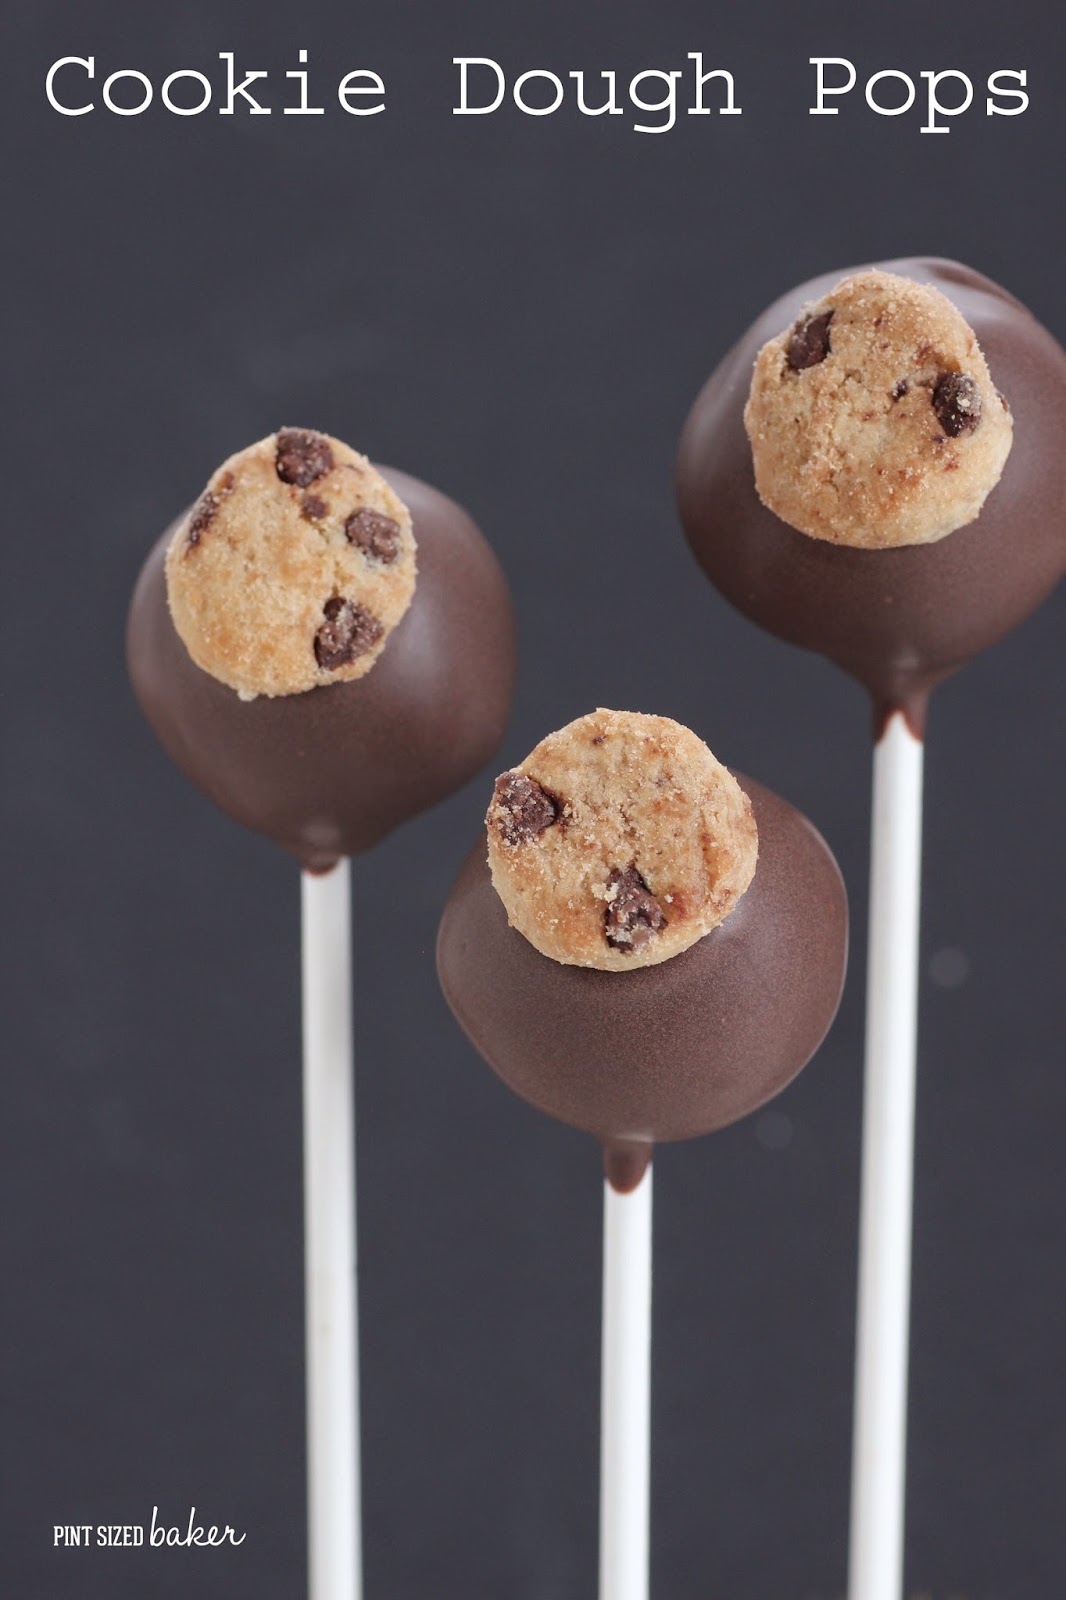 Everyone loves to eat raw cookie dough, now you can enjoy your Edible Cookie Dough Pops dipped in chocolate and topped with a mini chocolate chip cookie.